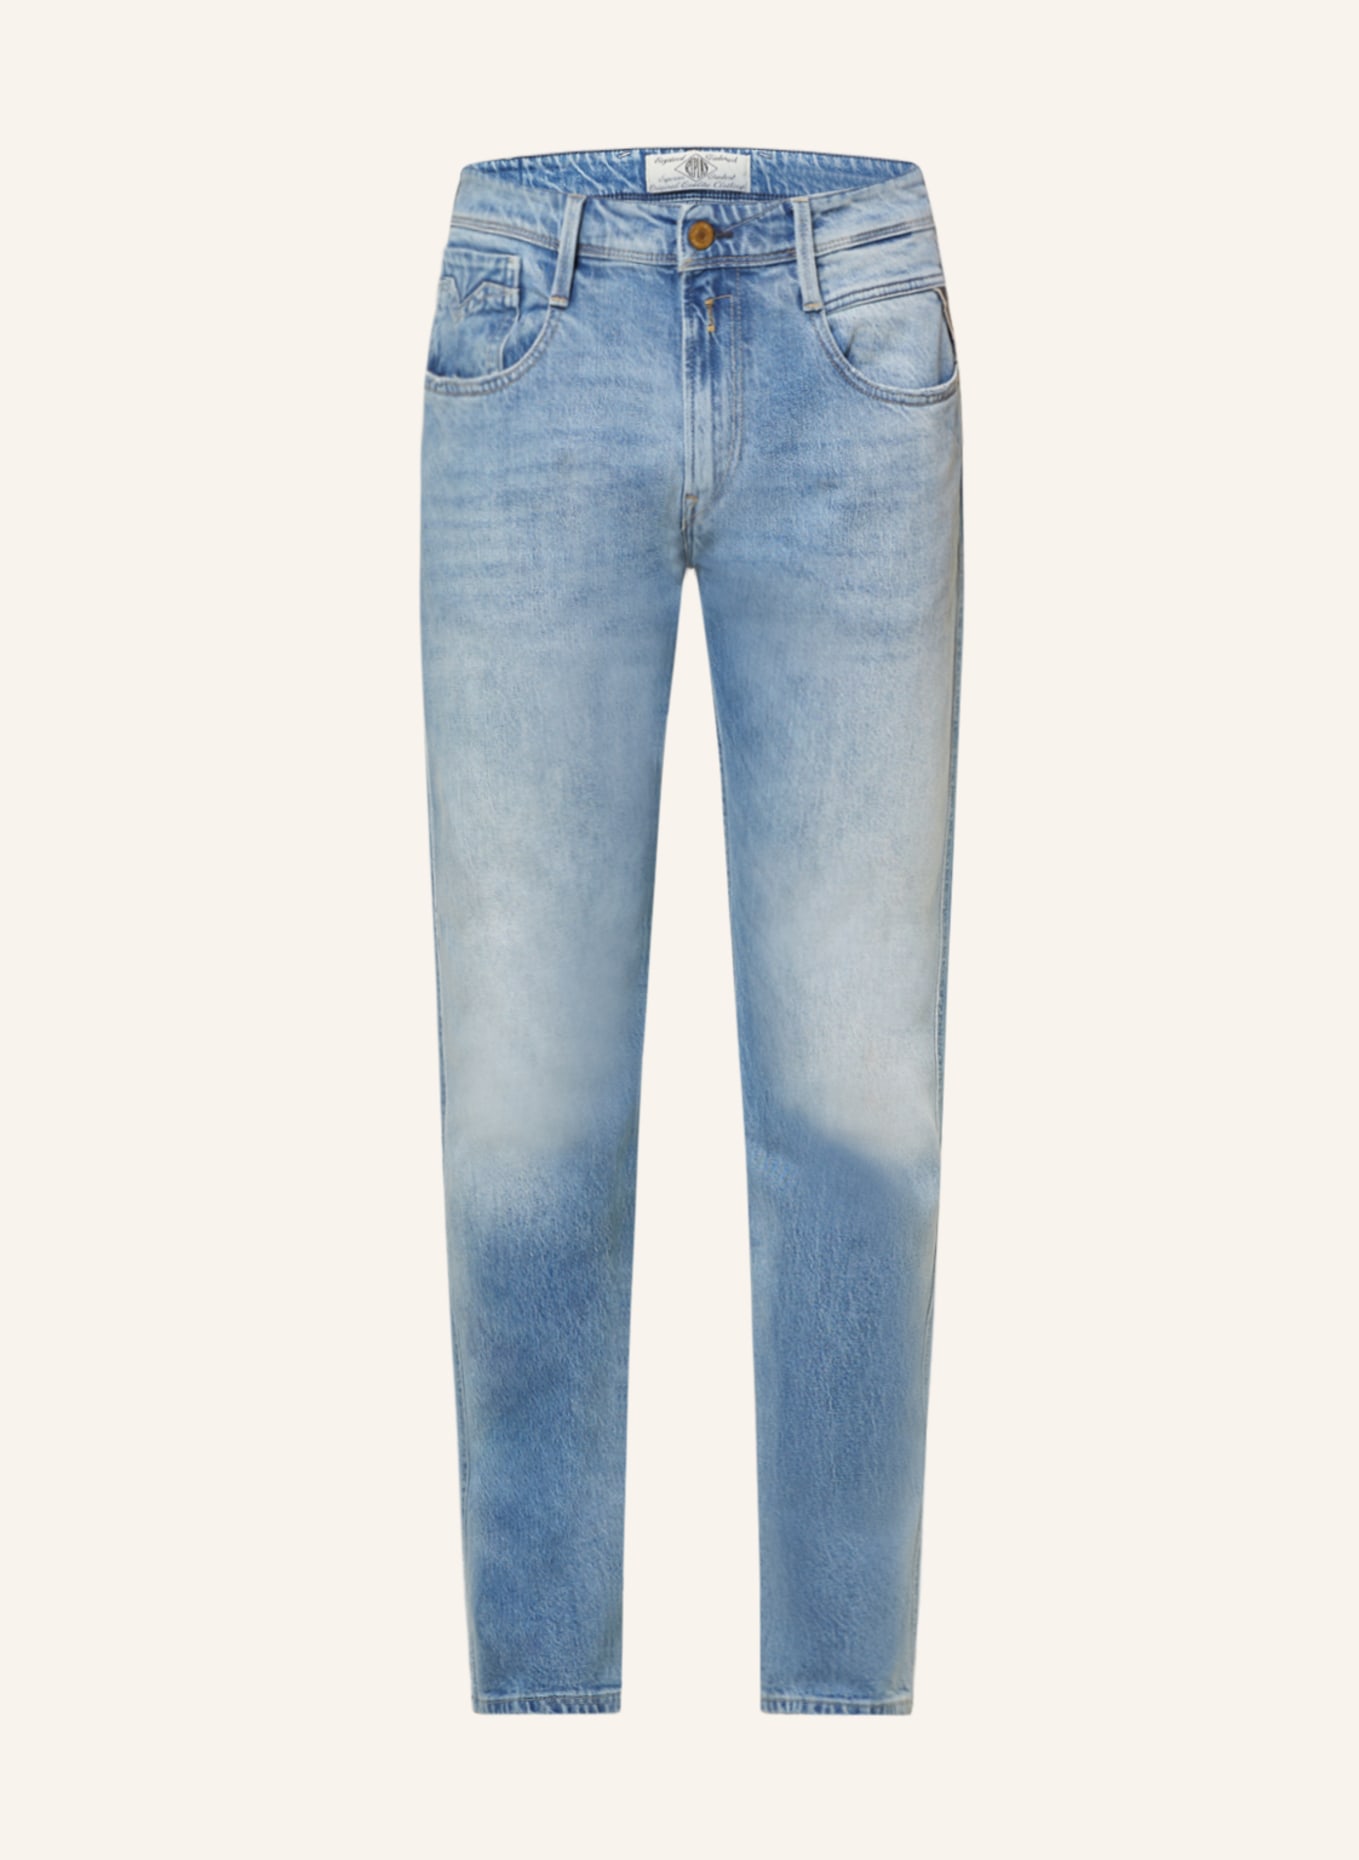 REPLAY Jeans ANBASS Slim Fit, Farbe: 010 LIGHT BLUE(Bild null)